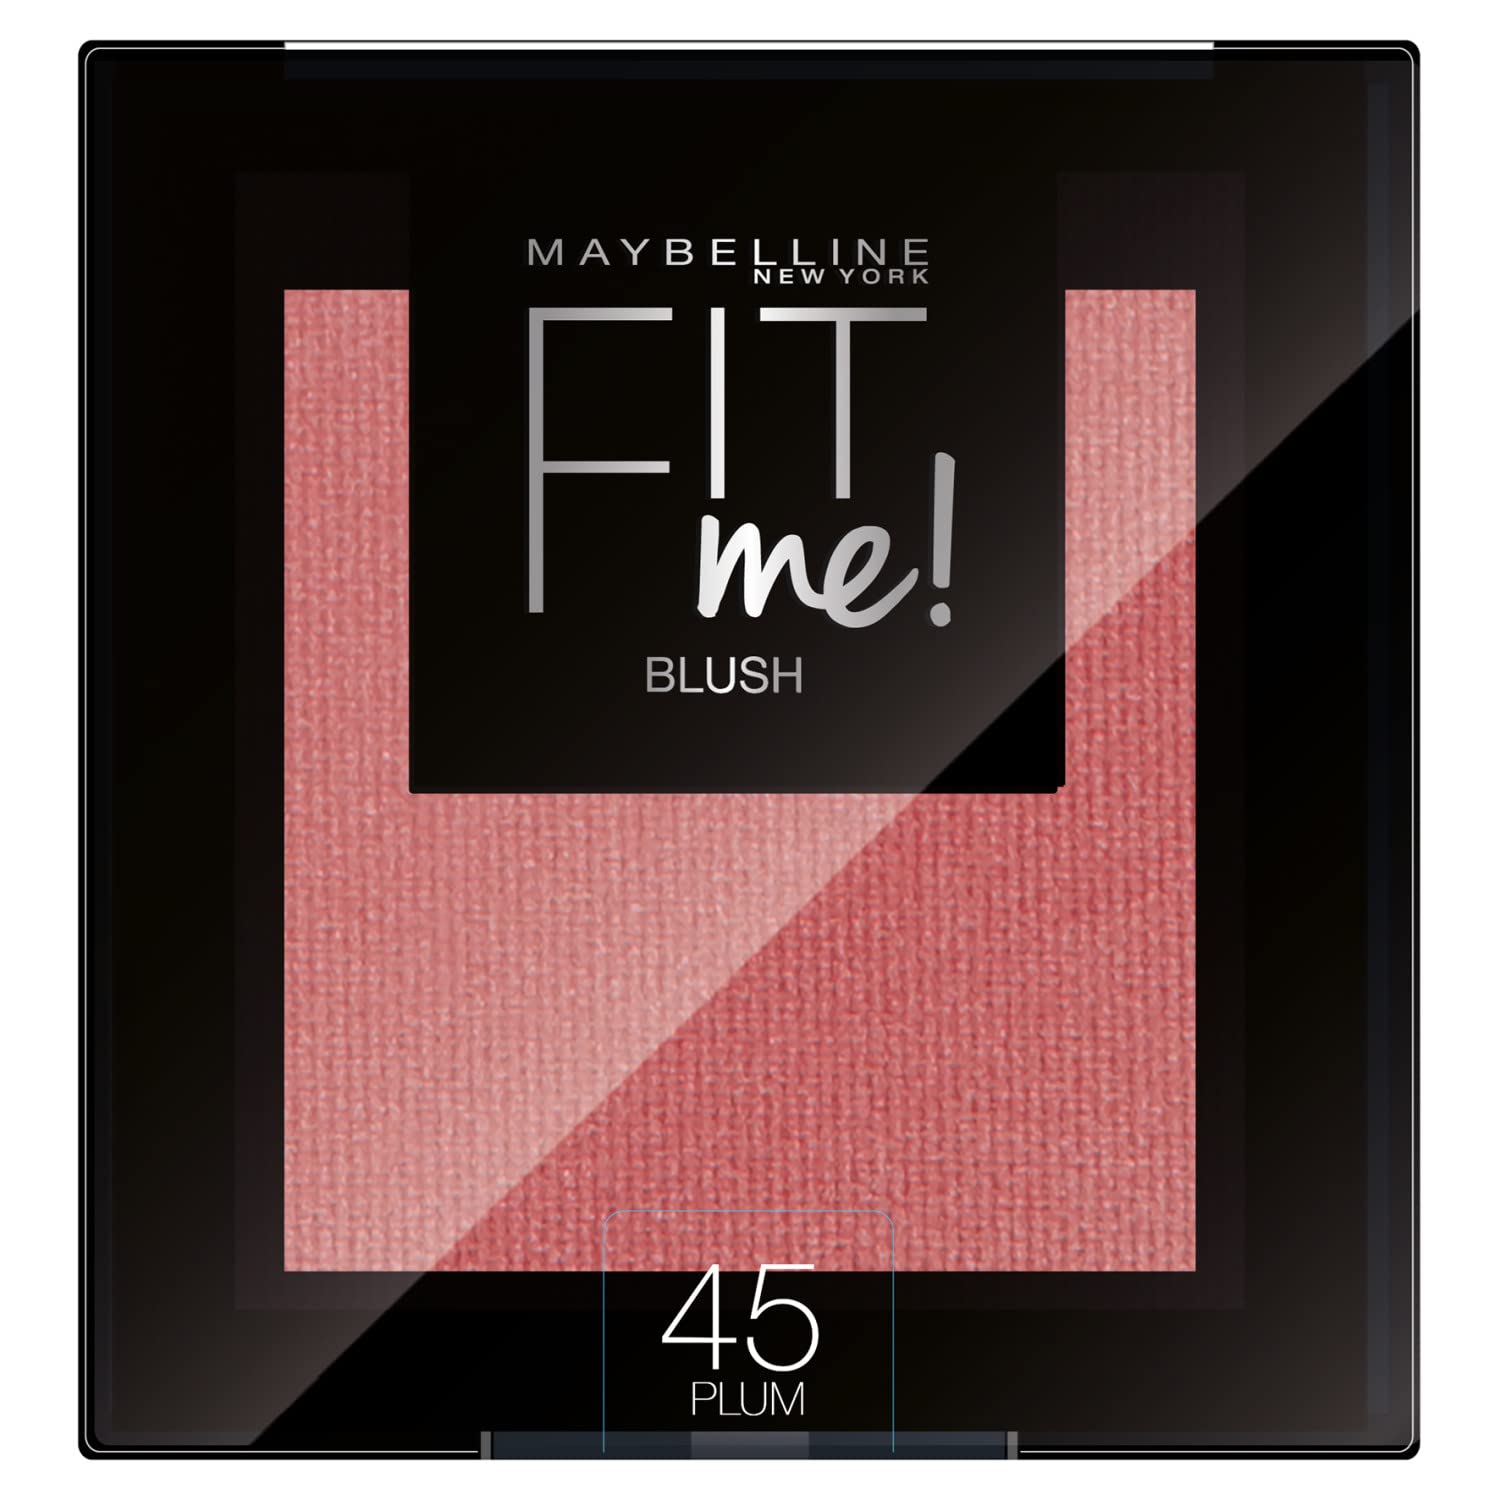 Maybelline New York Fit Me! Blush 45 Plum Pack of 3 x 4.5 g